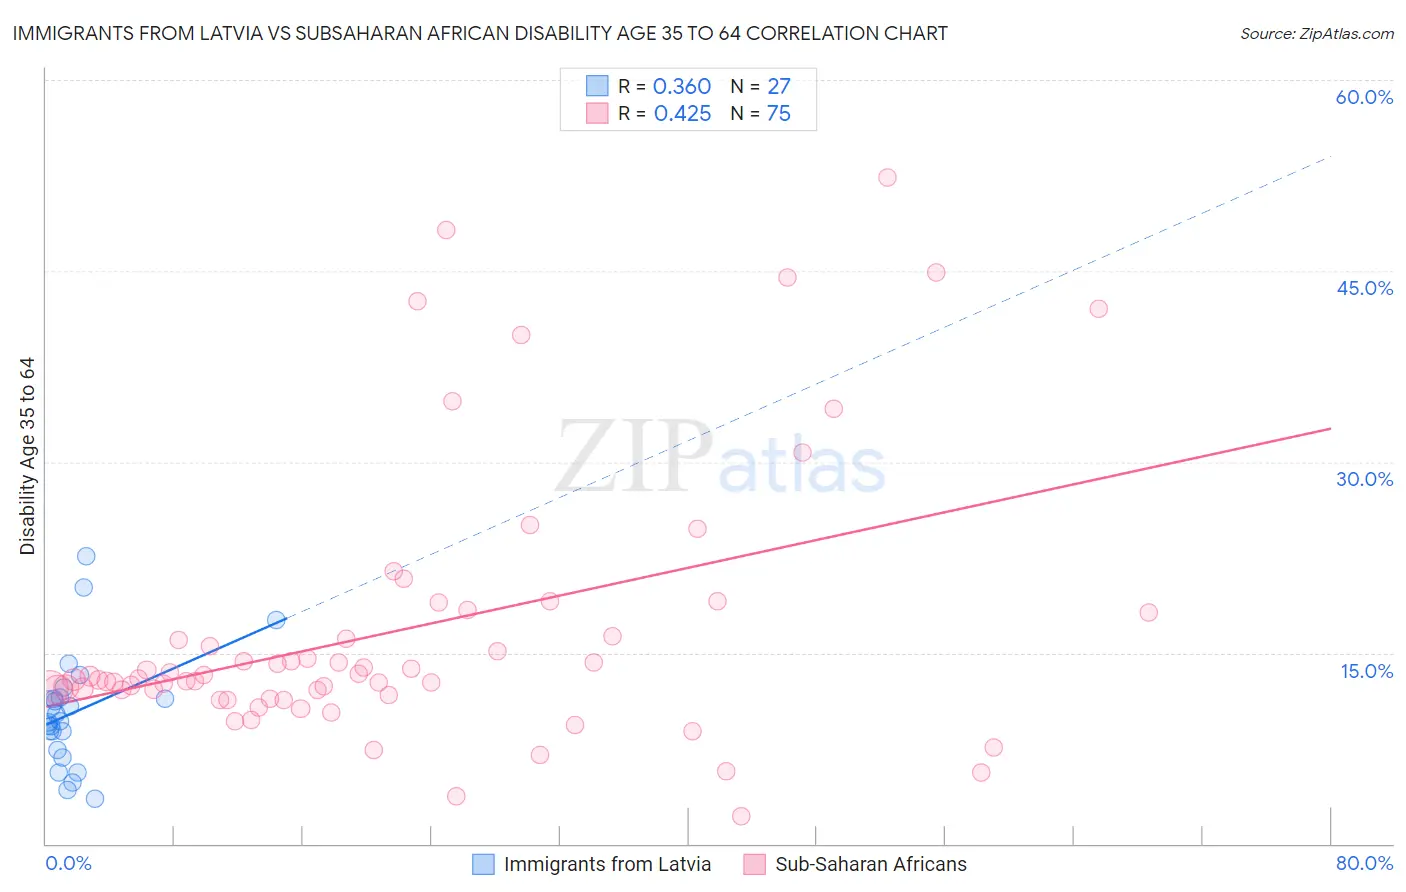 Immigrants from Latvia vs Subsaharan African Disability Age 35 to 64